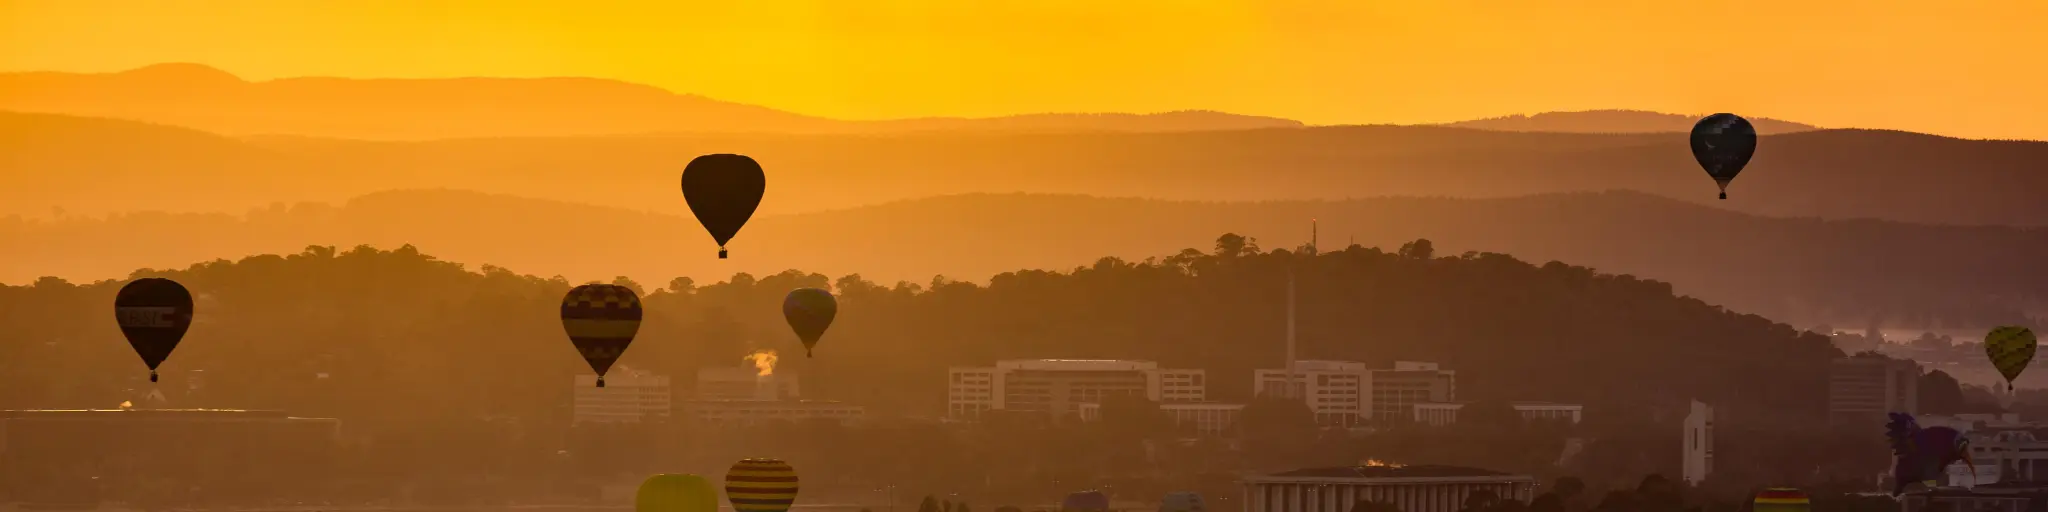 Hot air balloons are flying up during sunrise over the Lake Burley Griffin